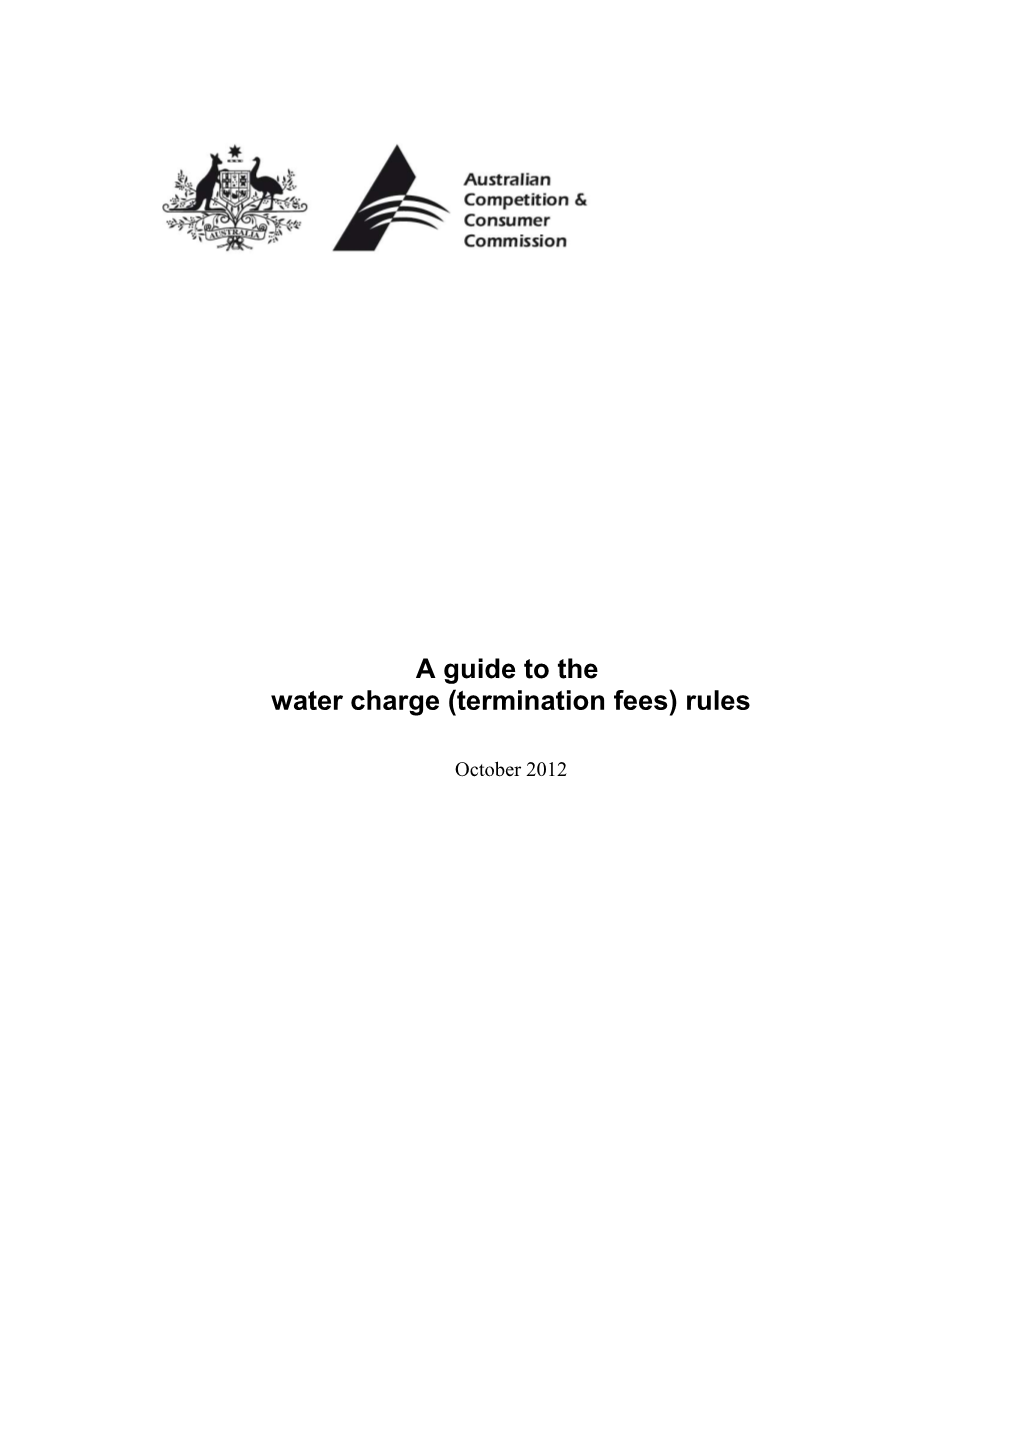 A Guide to the Water Charge (Termination Fees) Rules